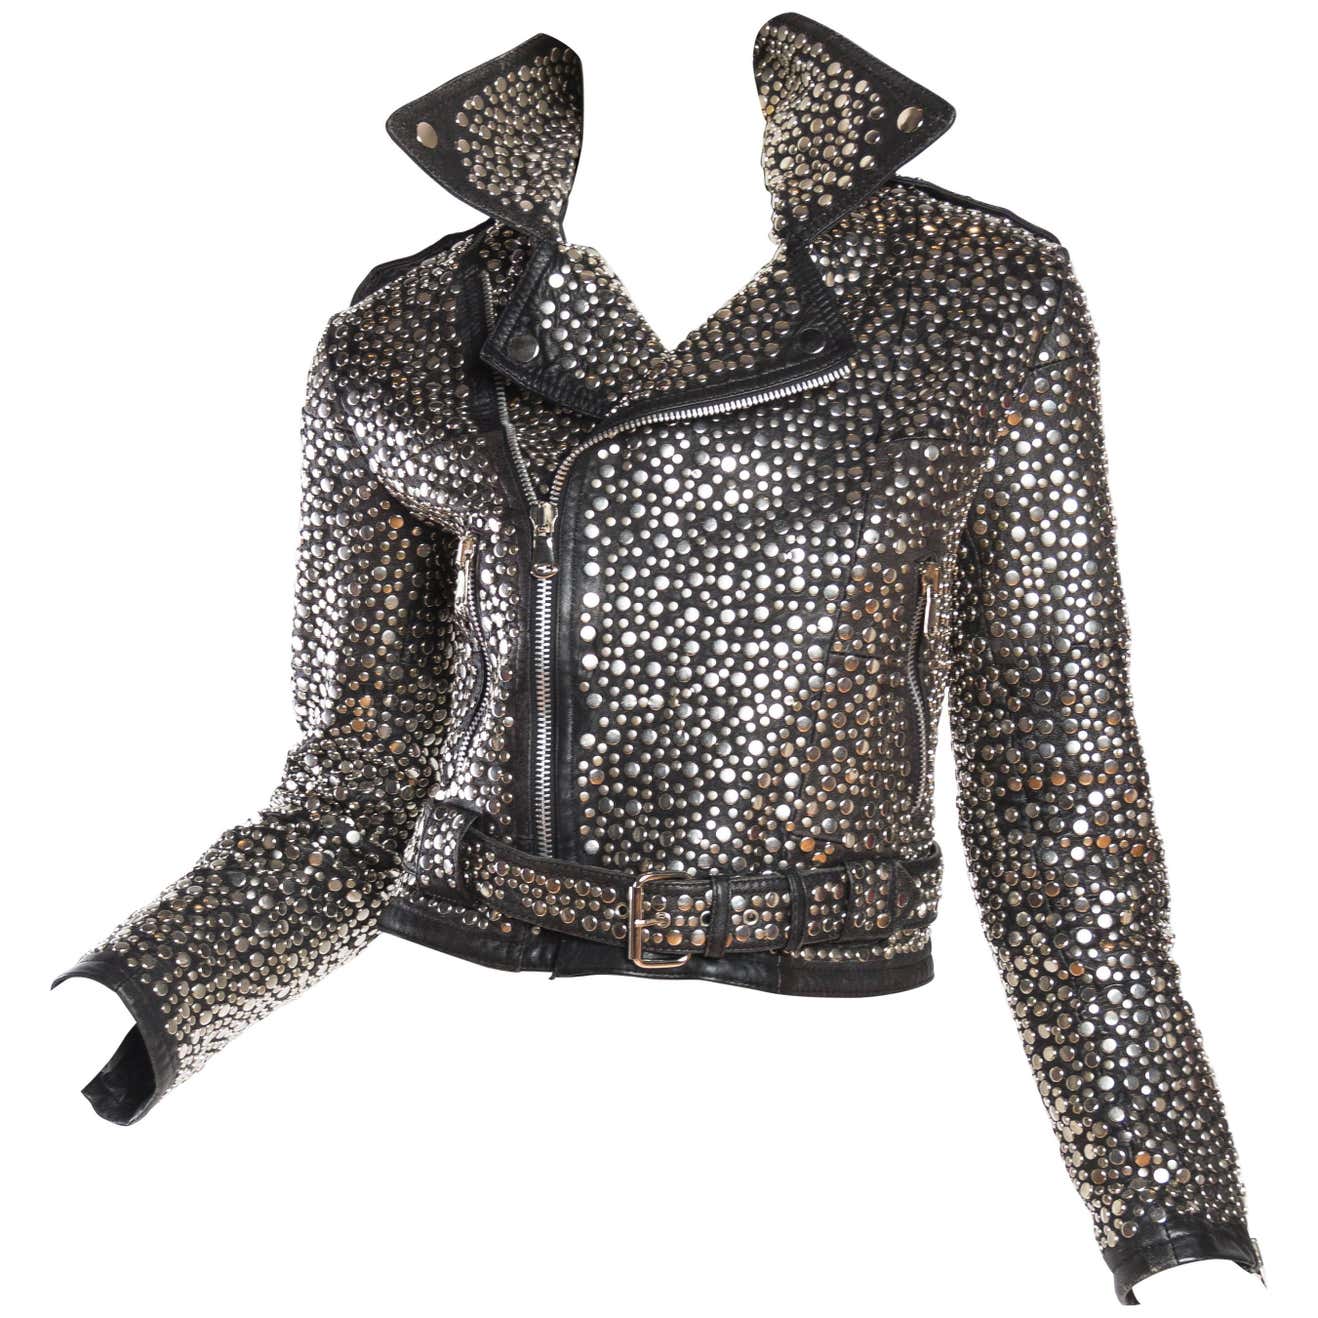 Phenomenal Leather Biker Jacket Completely Covered in Metal Studs at ...